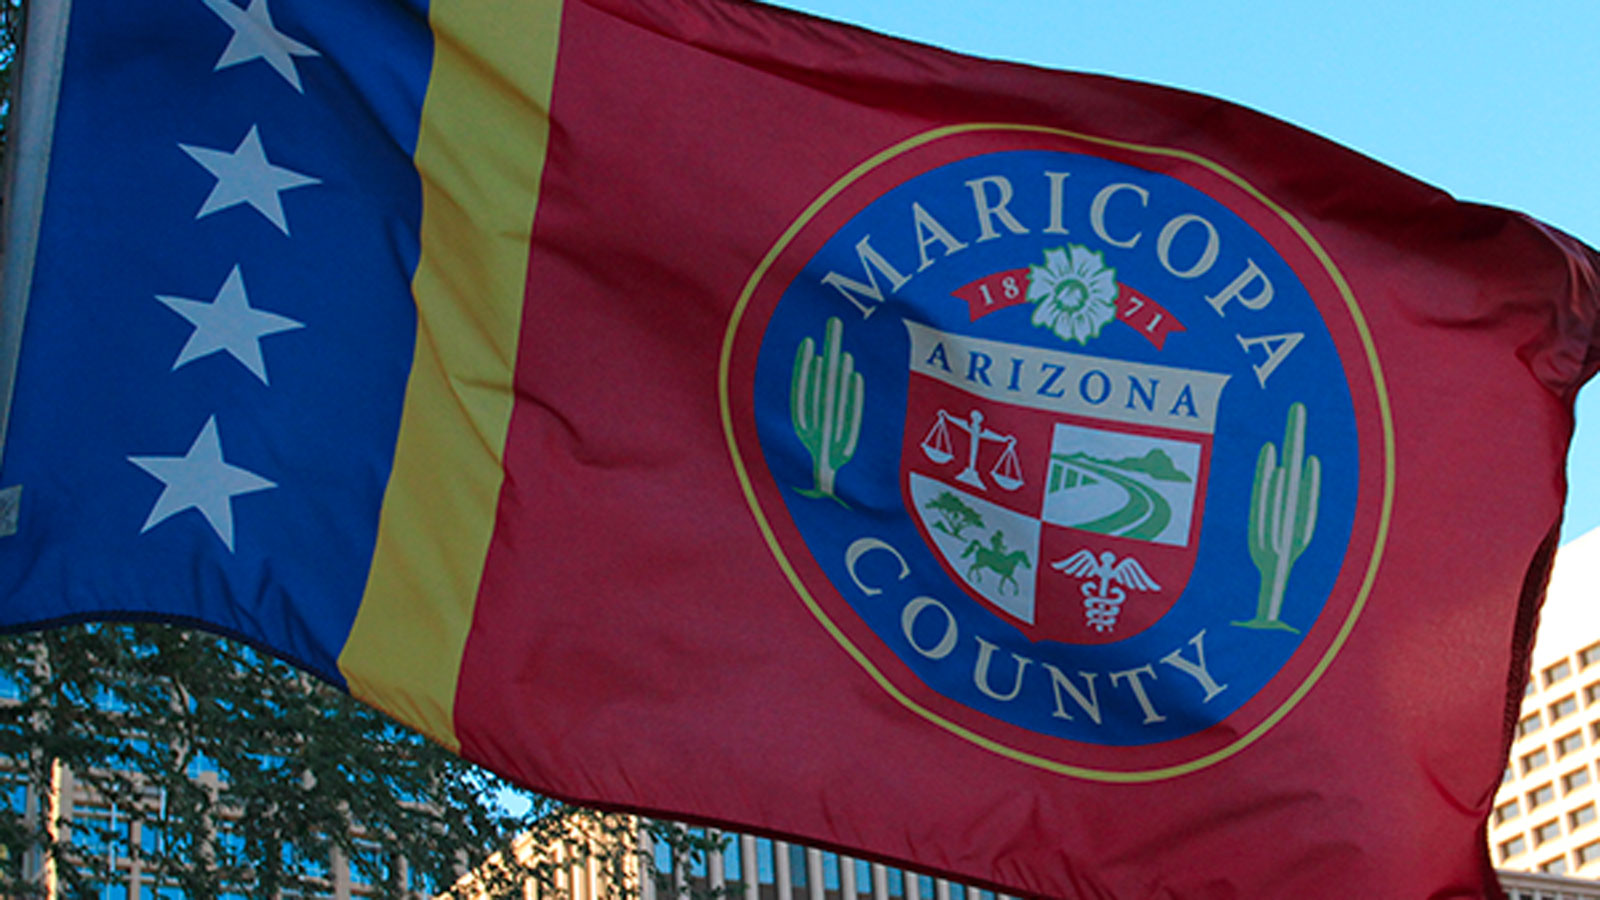 Maricopa County allocates over 7.5M for career education programs